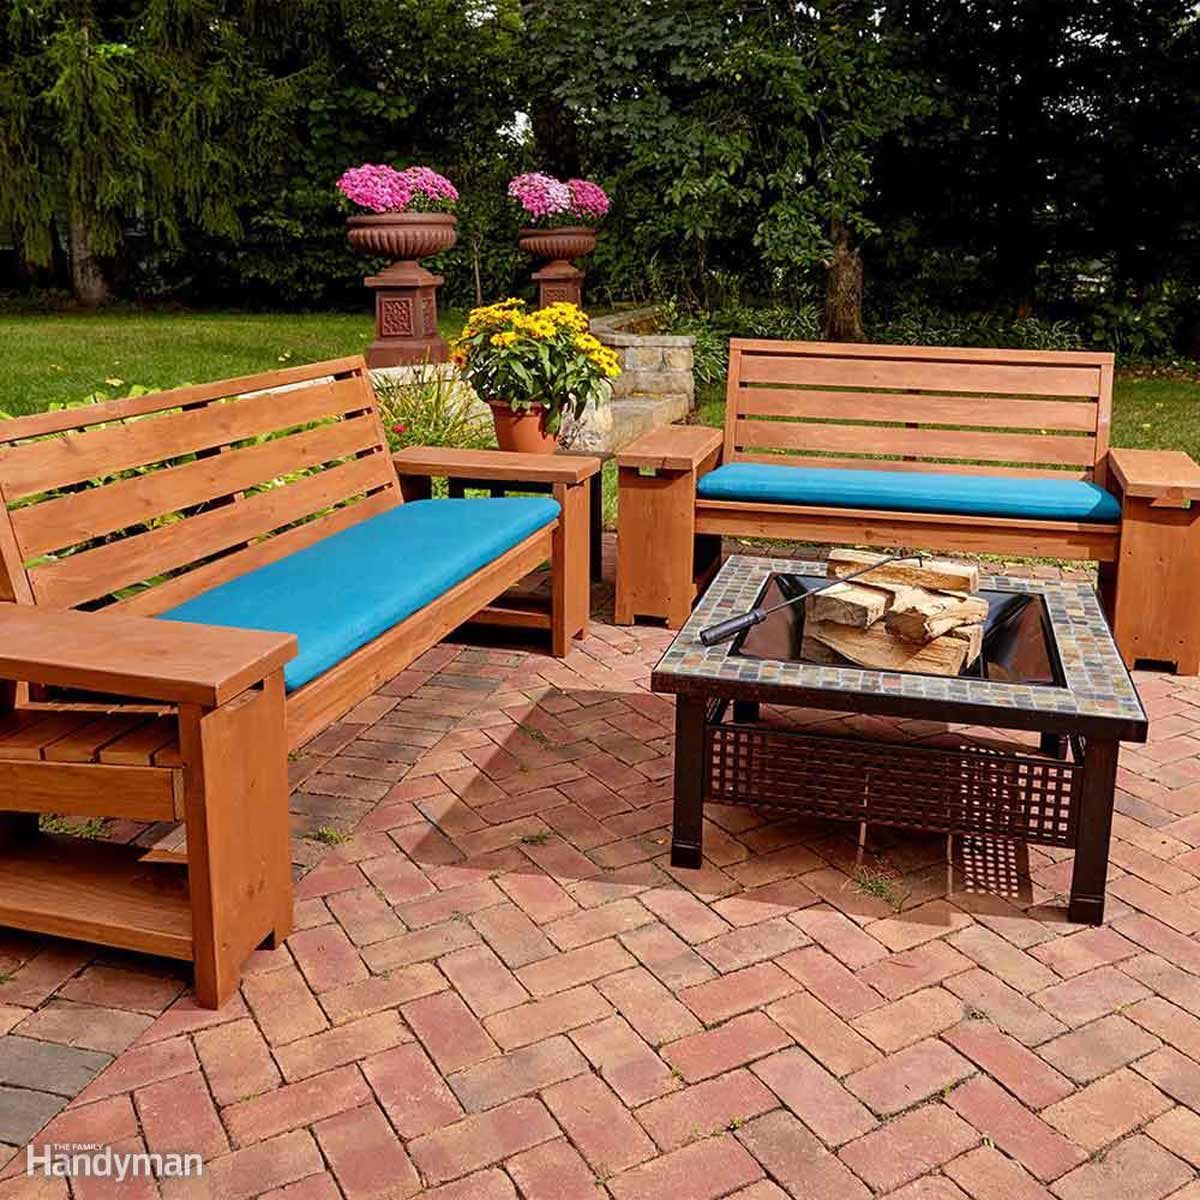 15 Awesome Plans for DIY Patio Furniture | Family Handyman